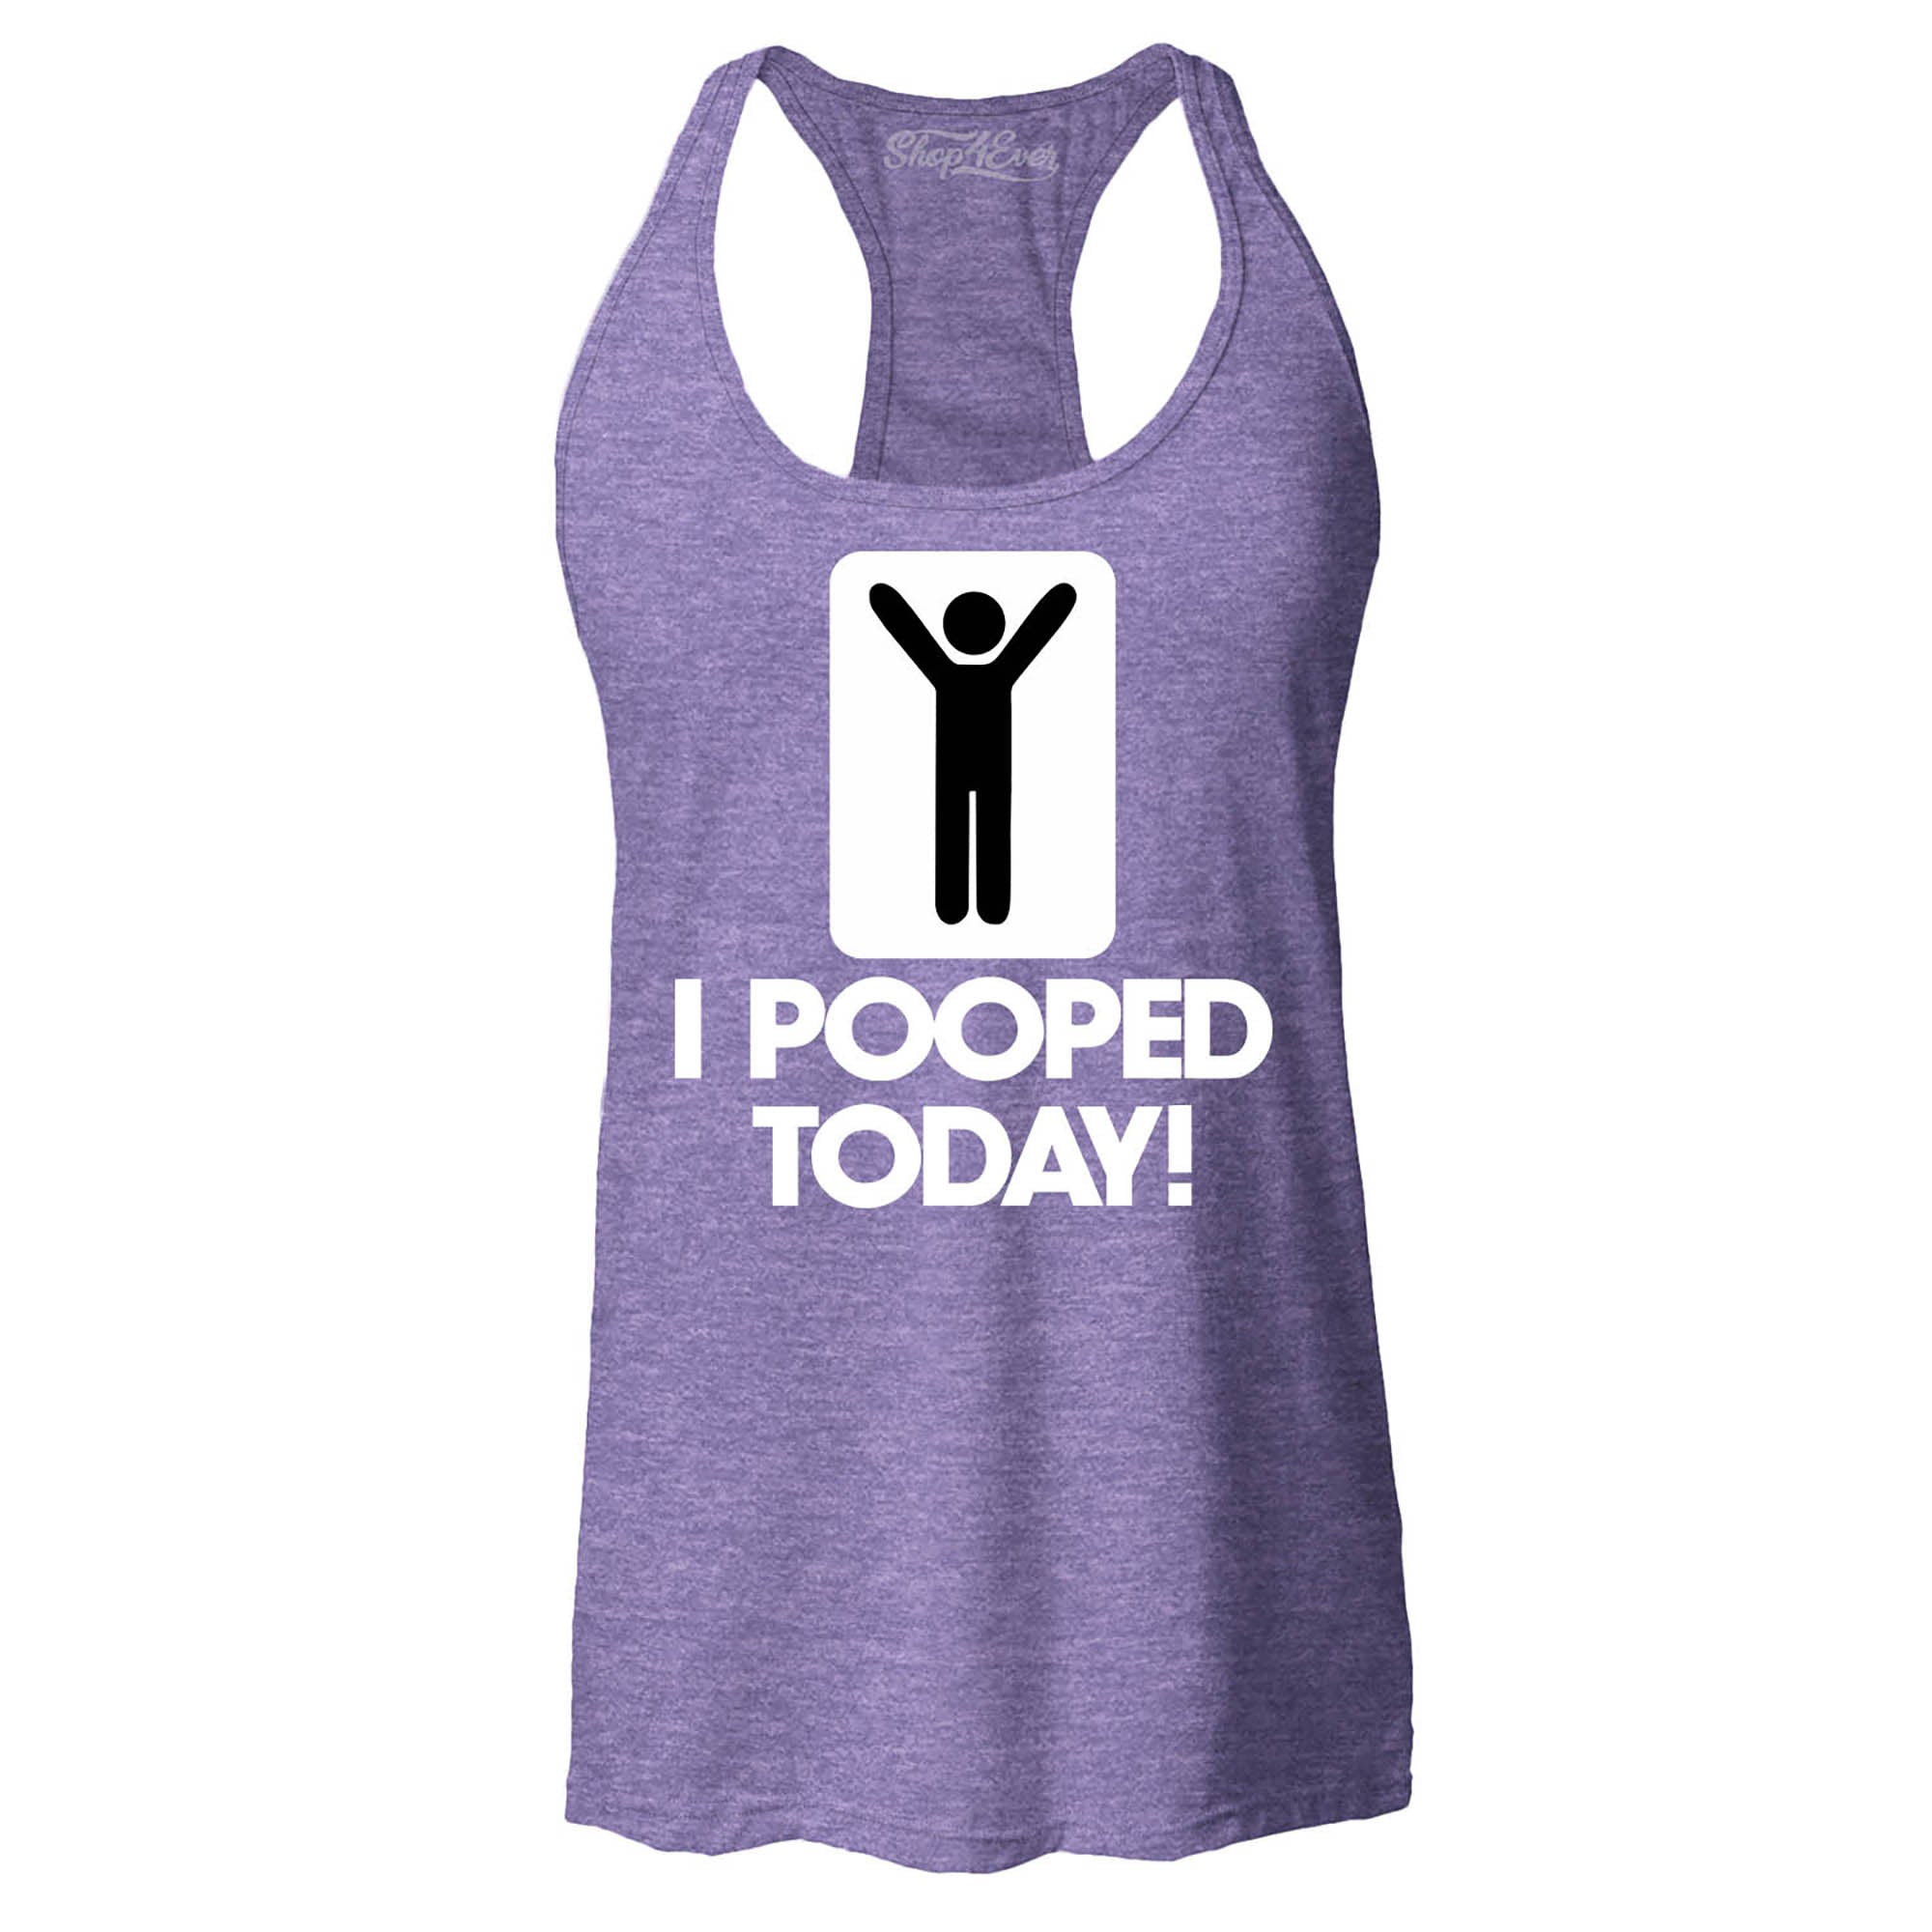 I Pooped Today Women's Racerback Tank Top Funny Tank Tops